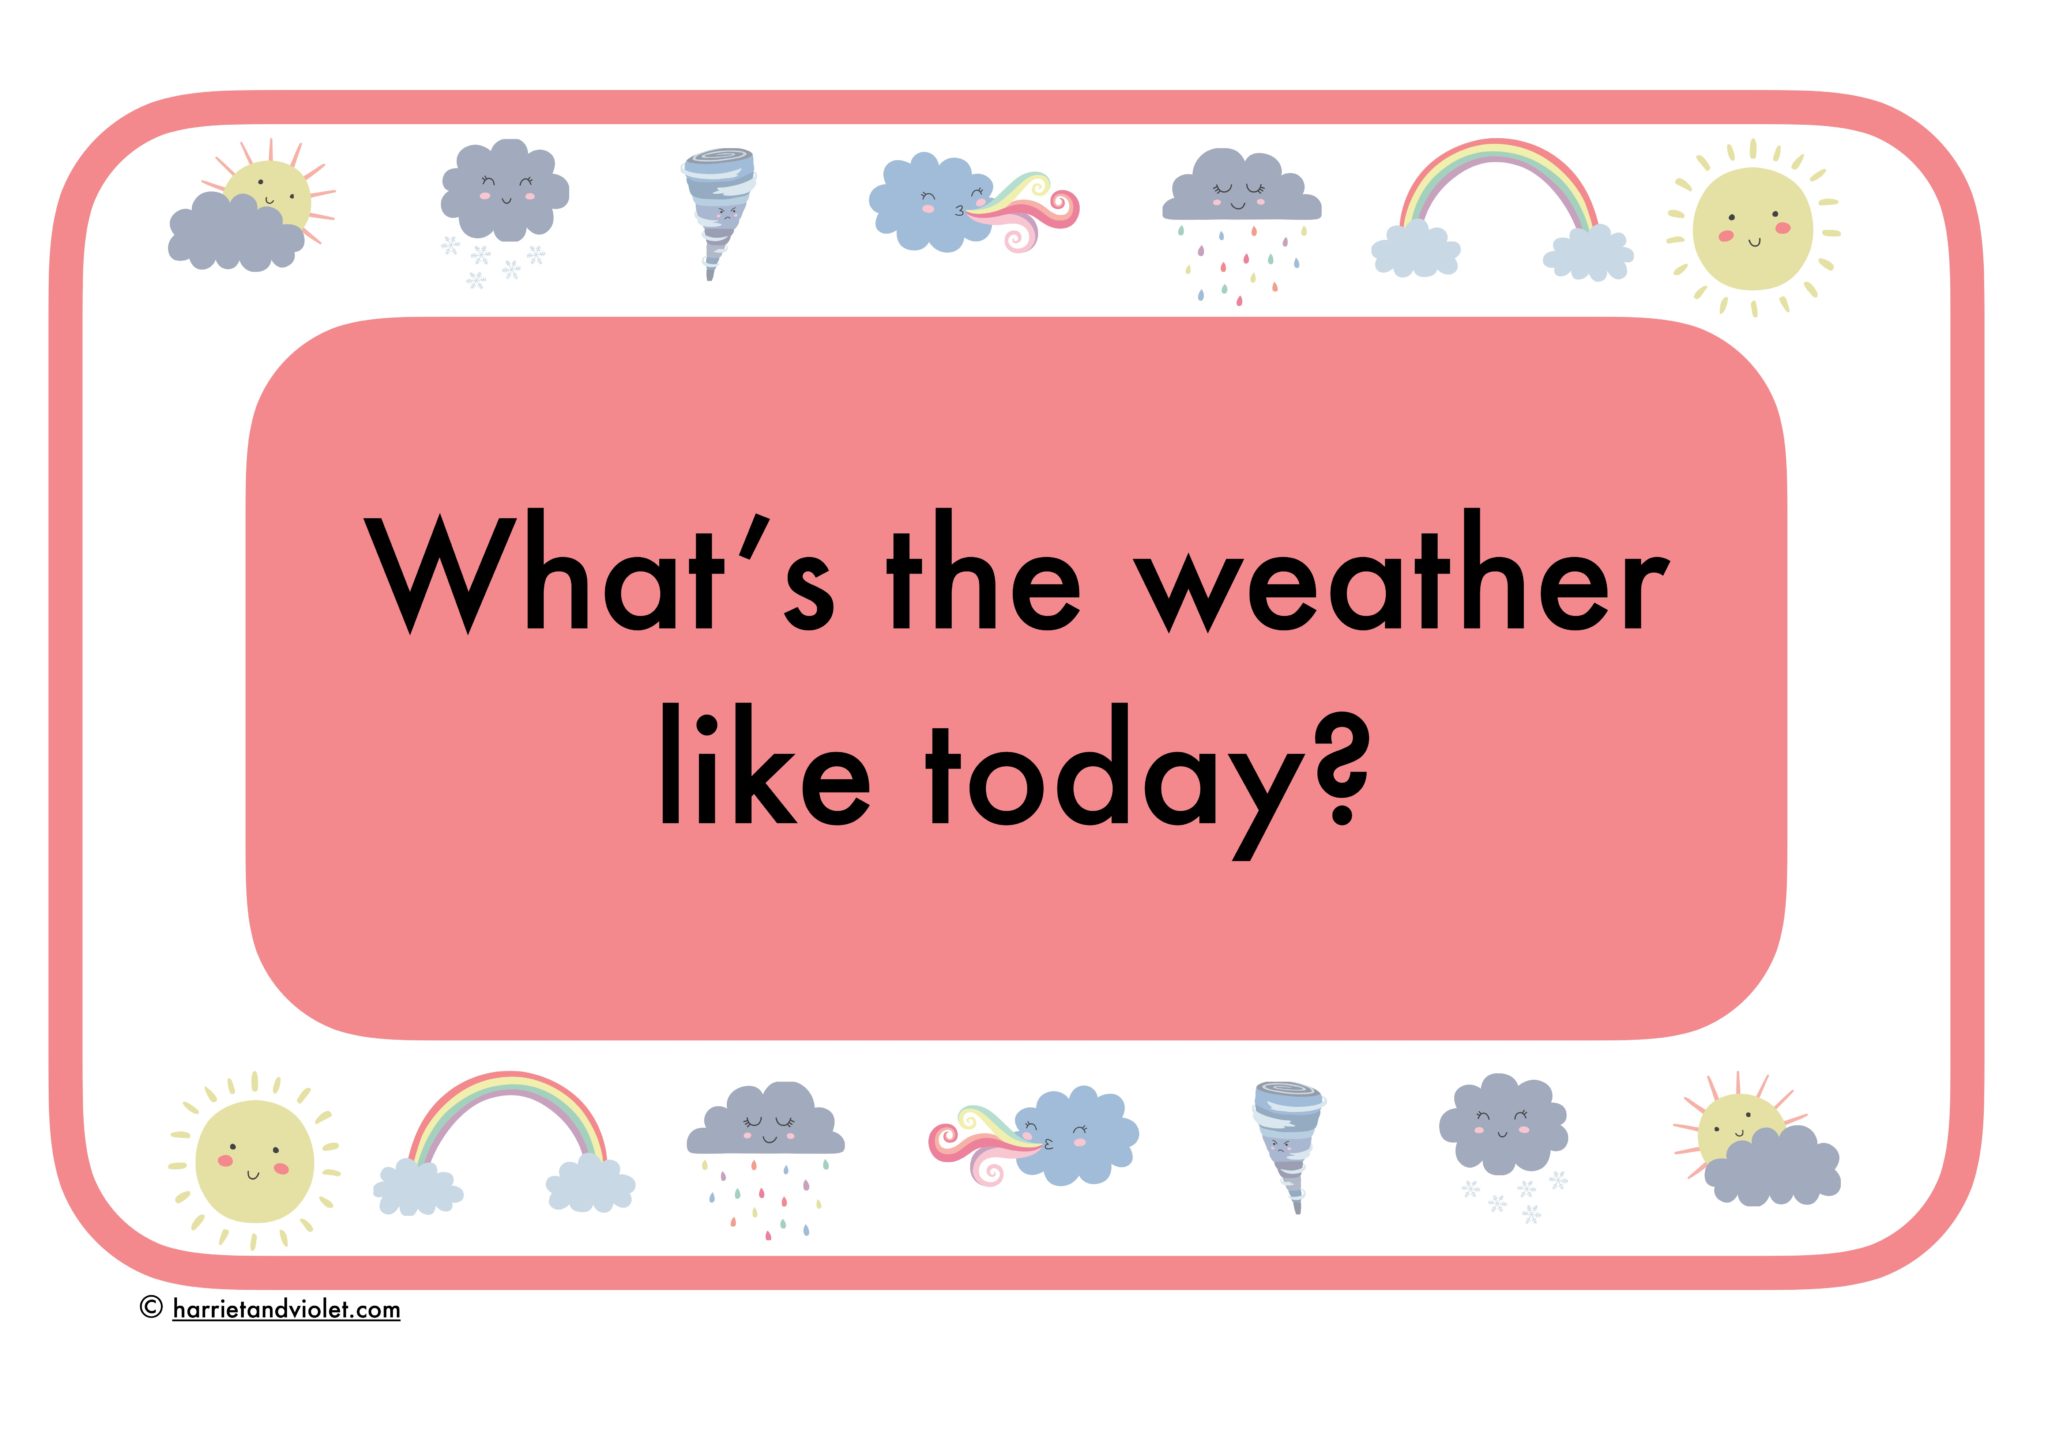 What s the weather песня. What`s the weather like today. What is the weather today. What is the weather like. Weather like today.